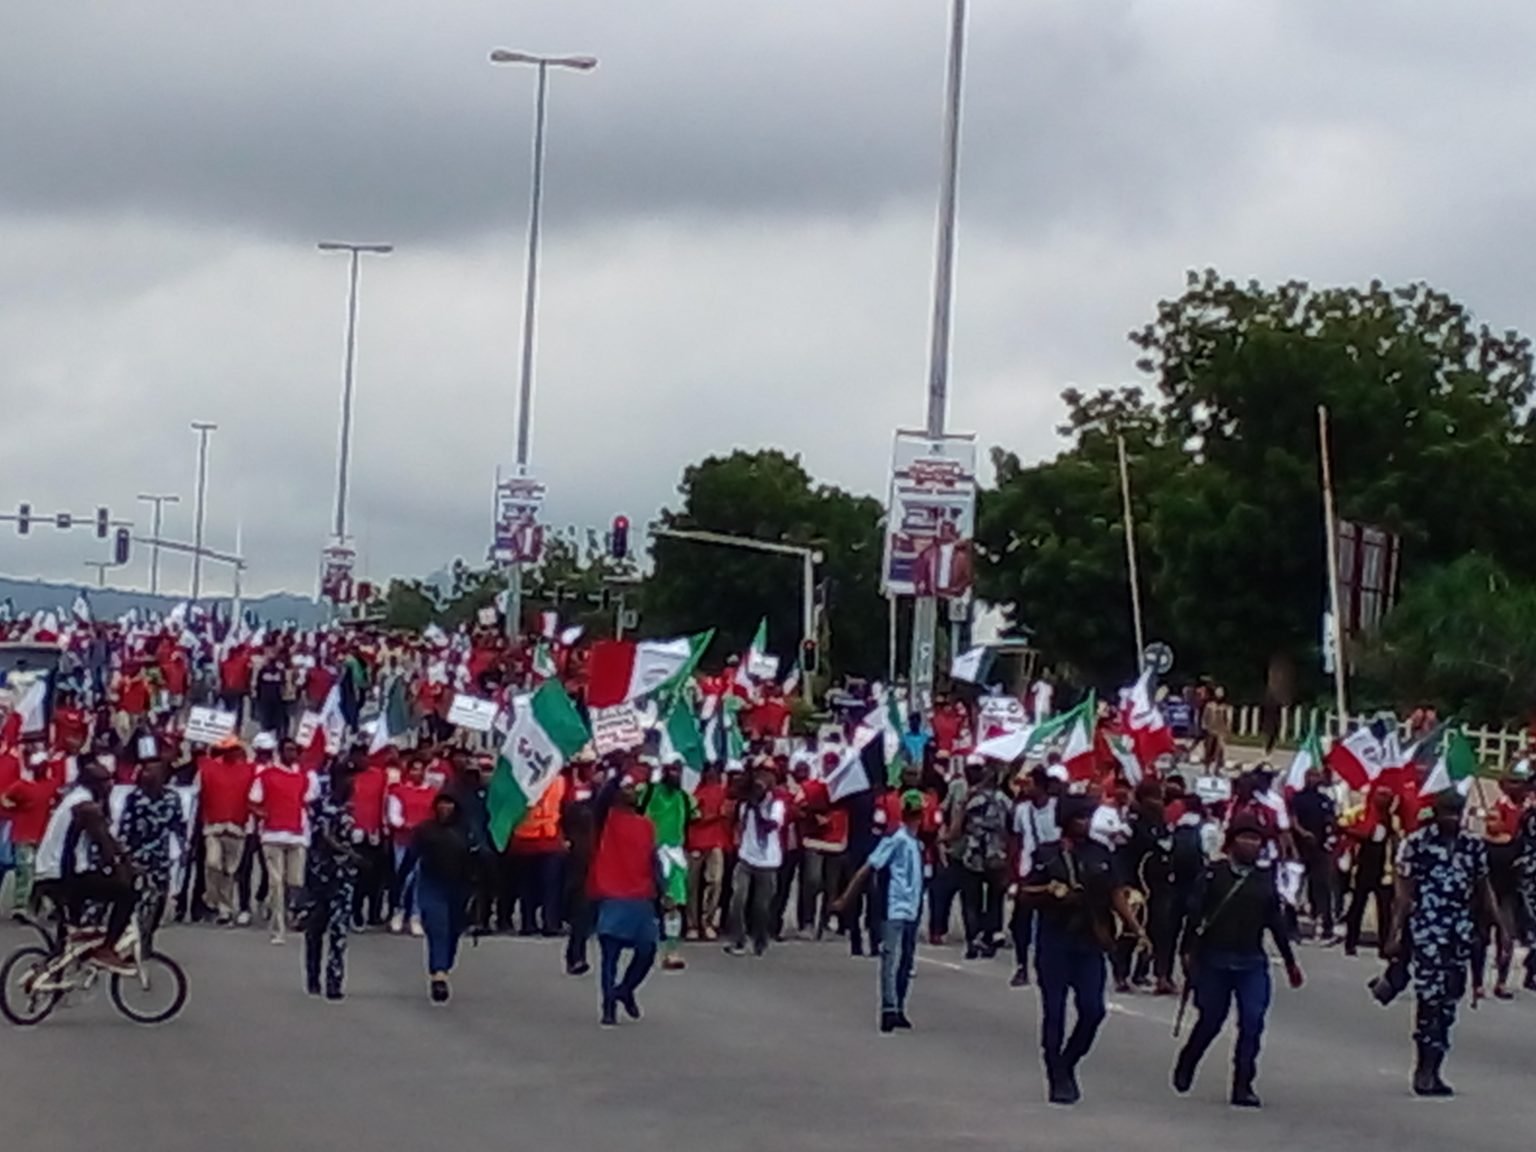 Subsidy protest: Labour leaders concede after President Tinubu parley